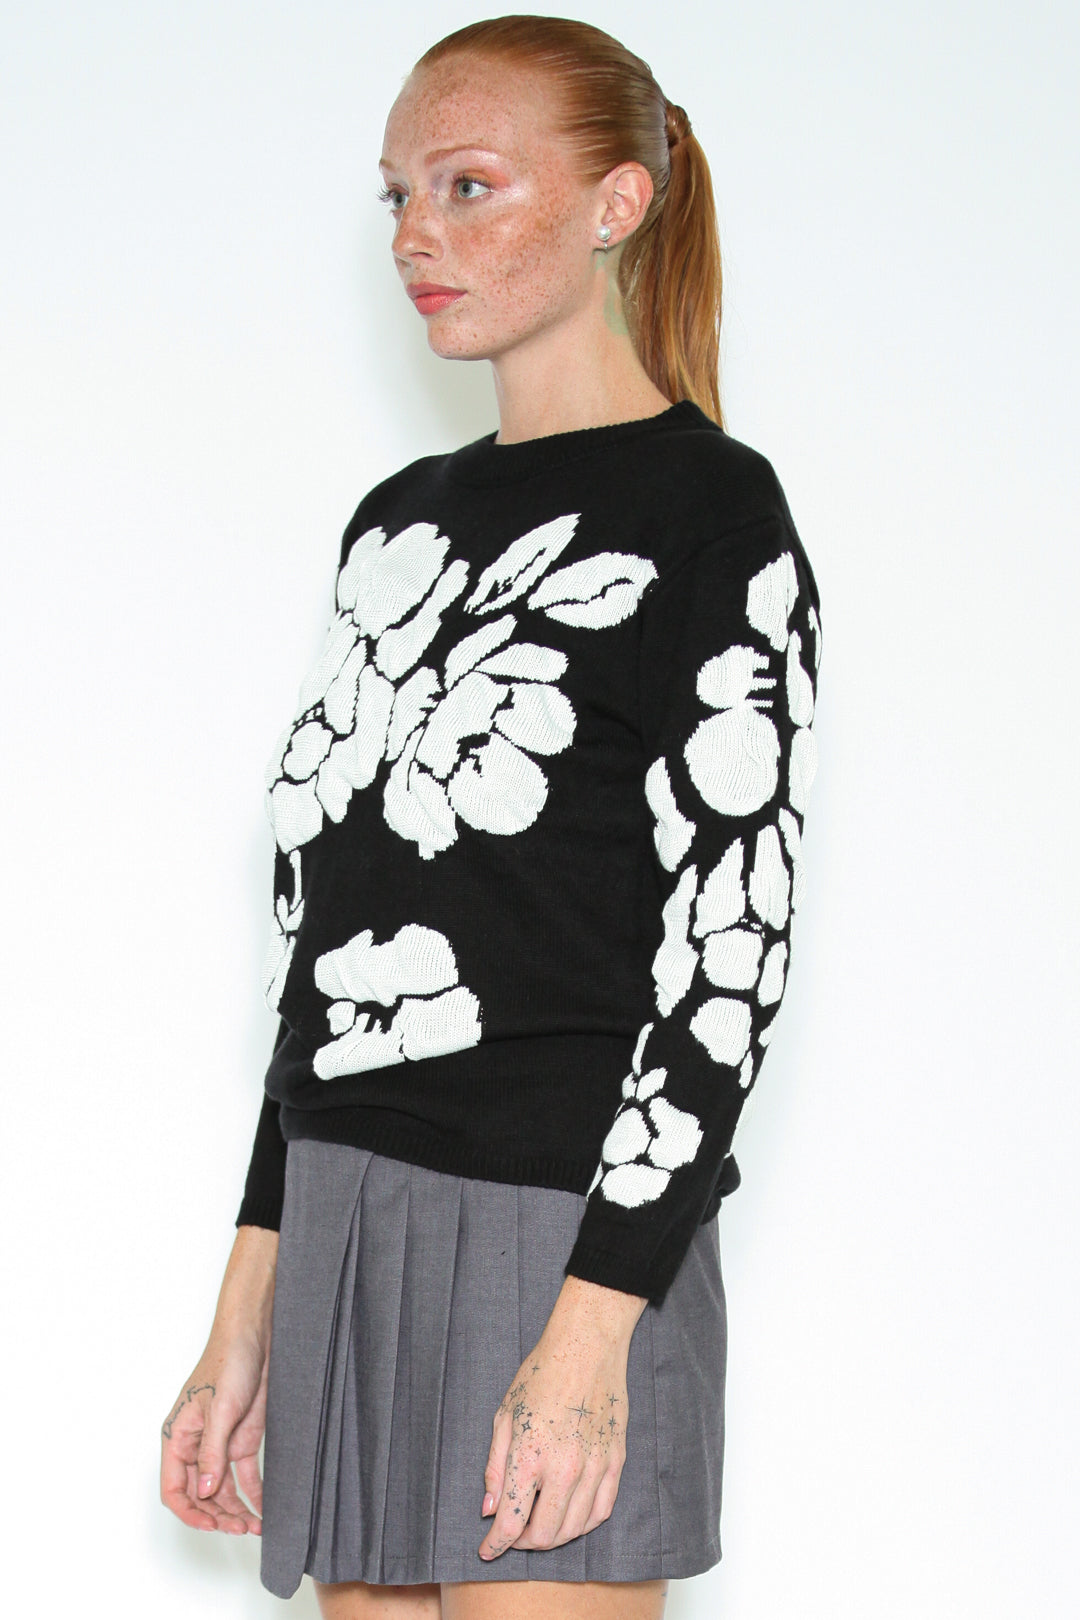 Black White Floral Sweater